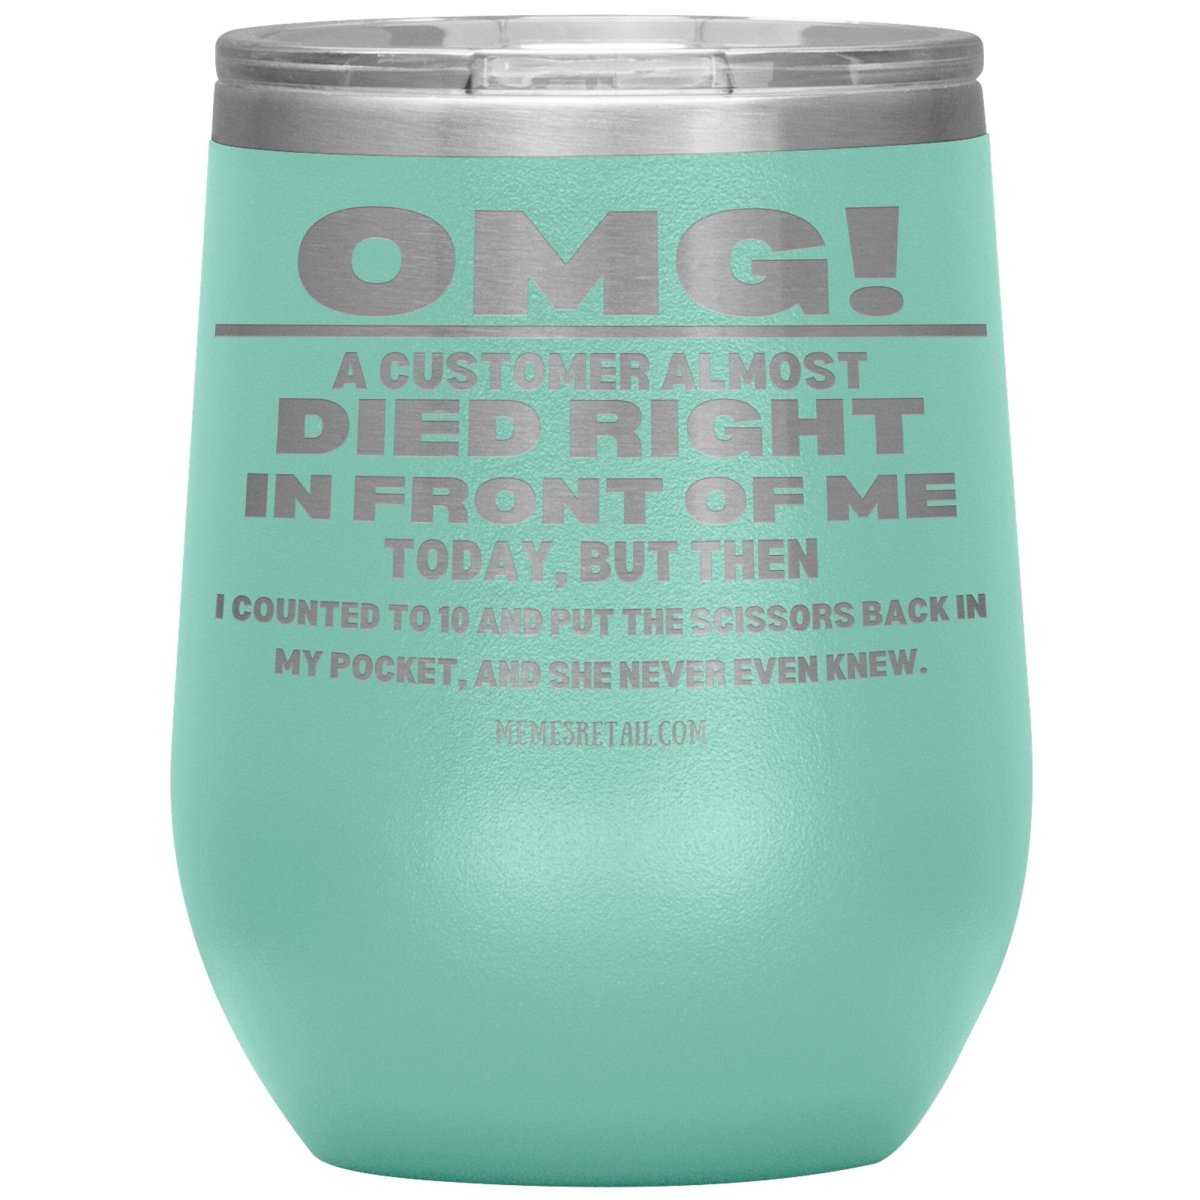 OMG! A Customer Almost Died Right In Front Of Me Tumbler, 12oz Wine Insulated Tumbler / Teal - MemesRetail.com